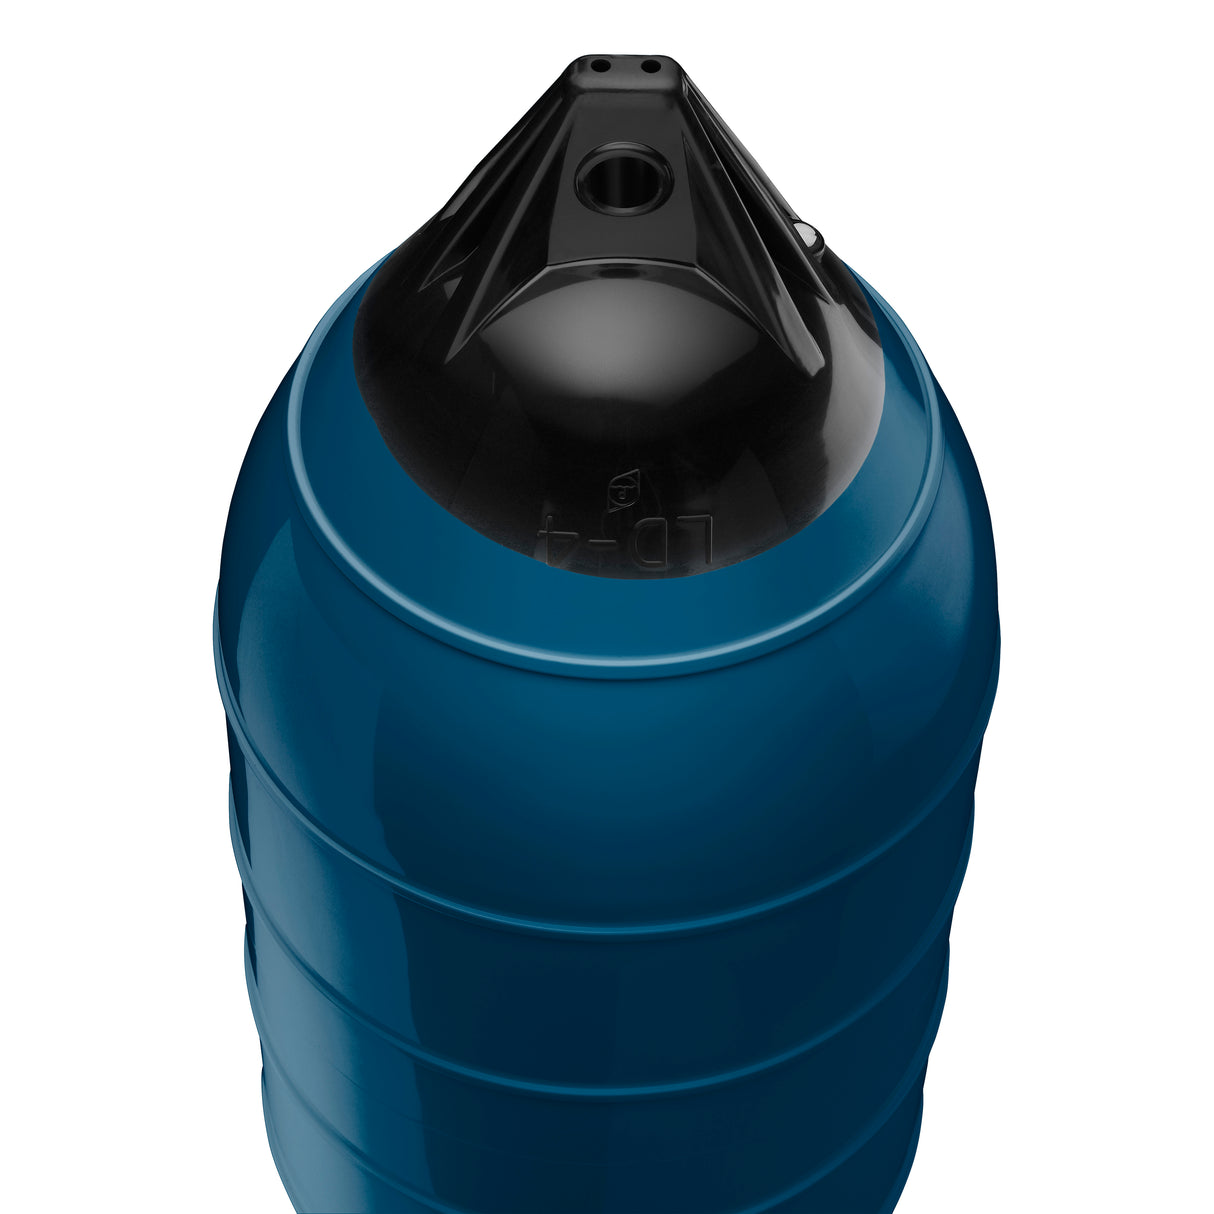 Catalina Blue low drag buoy with Black-Top, Polyform LD-4 angled shot